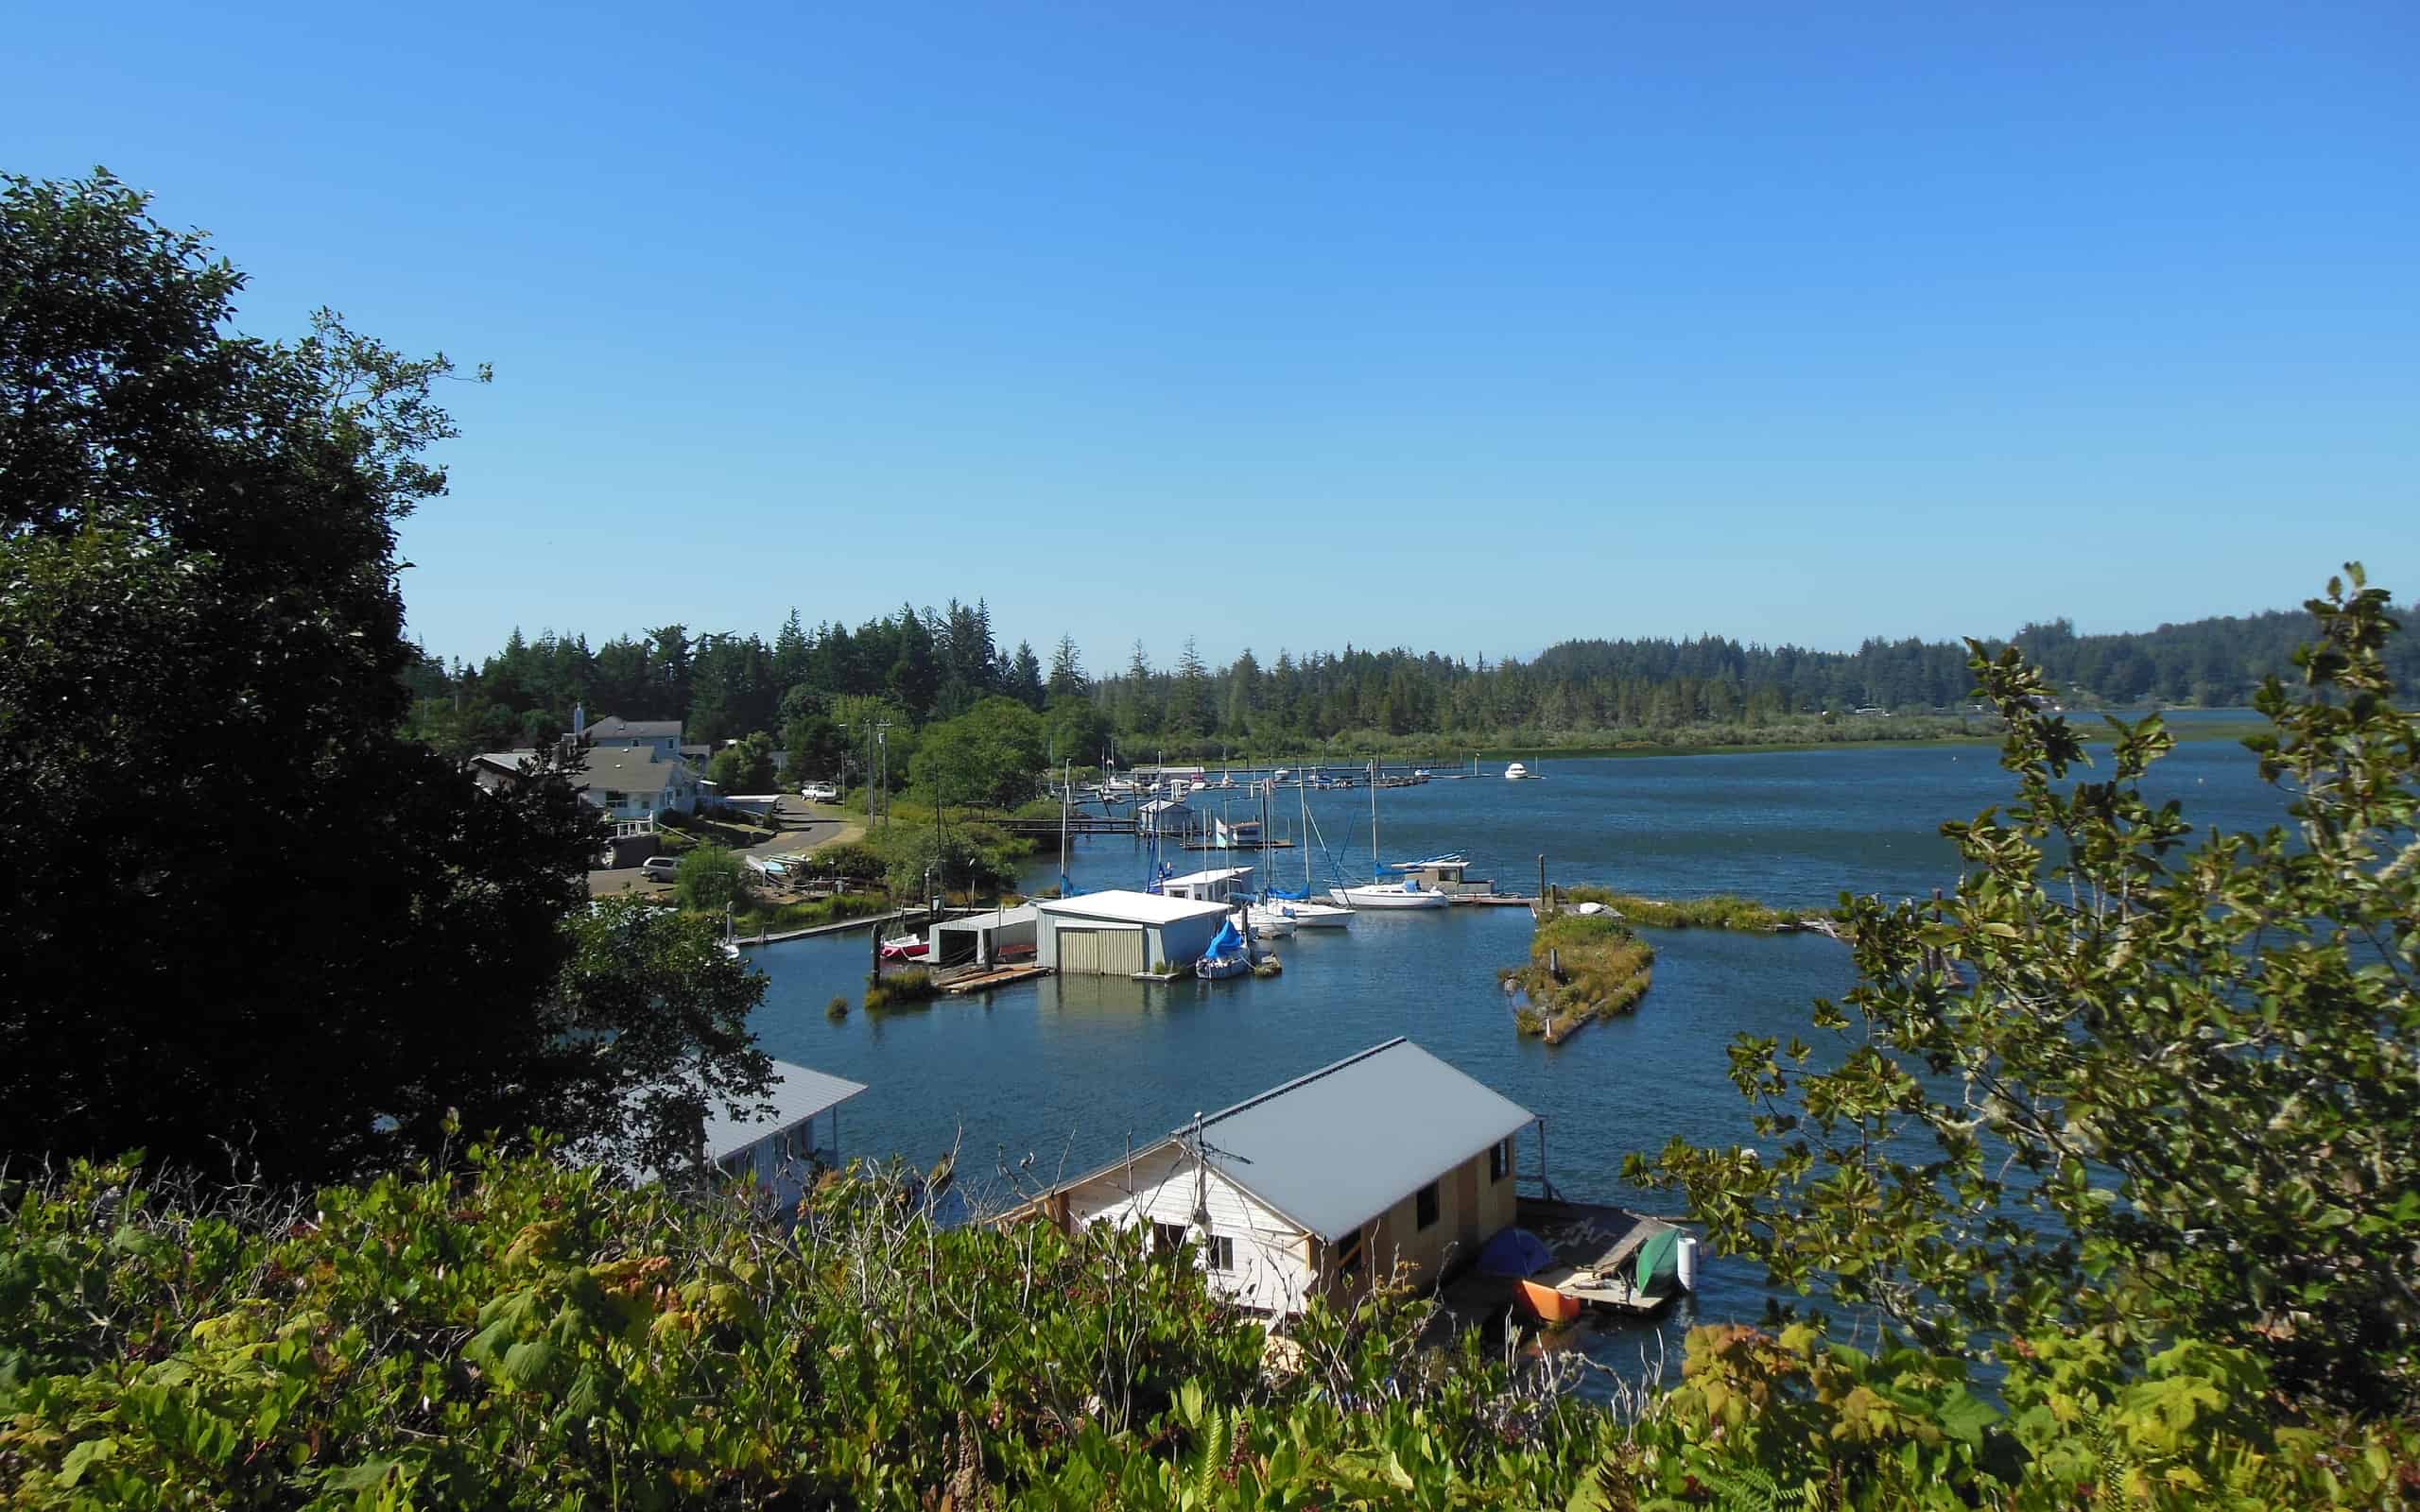 Siltcoos Lake at Dunes City, Oregon, a city on the coast in Lane County